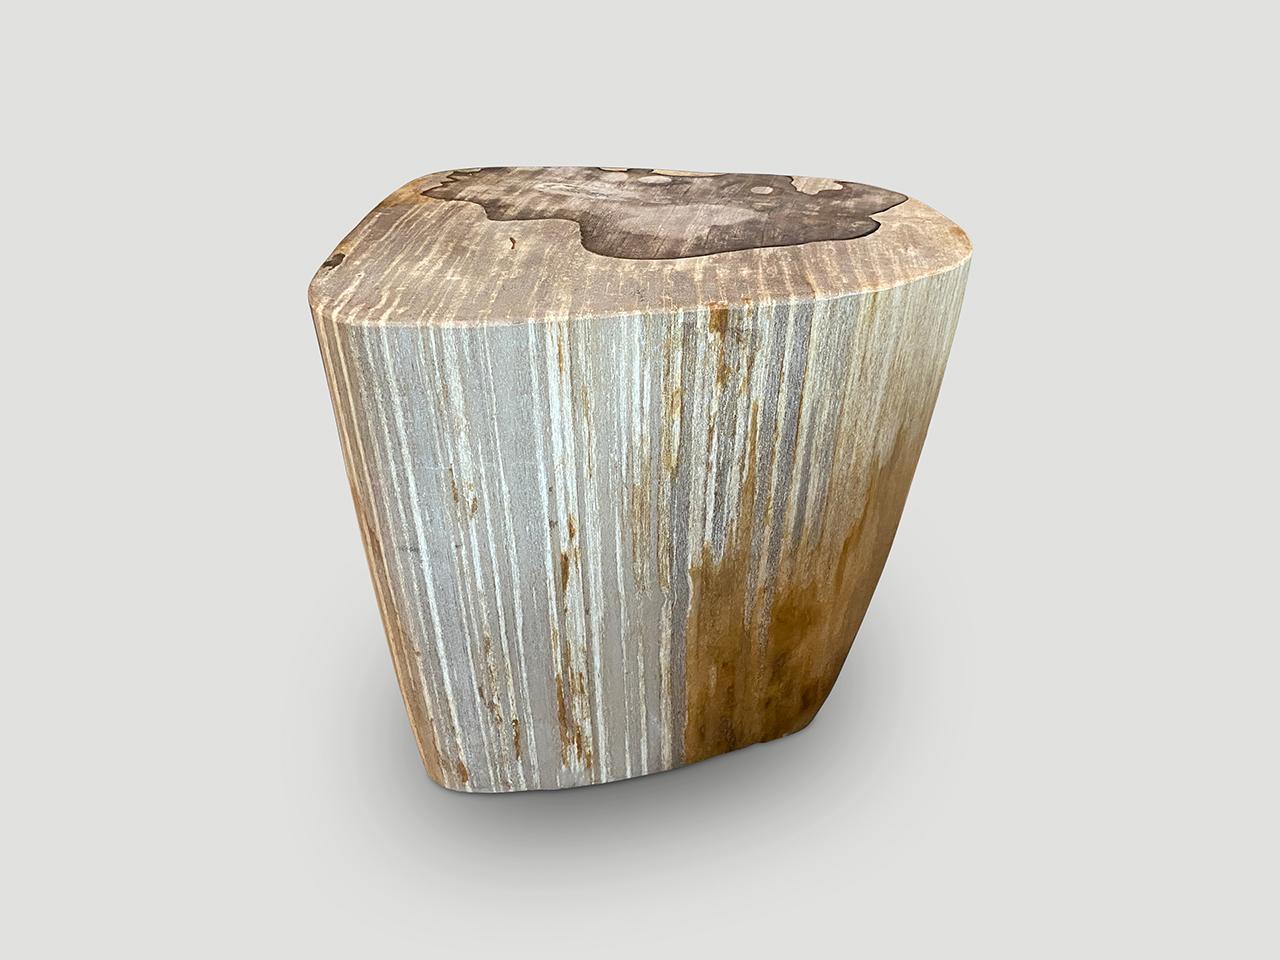 Beautiful minimalist petrified wood side table with stunning markings. It’s fascinating how Mother Nature produces these stunning 40 million year old petrified teak logs with such contrasting colors and natural patterns throughout. Modern yet with